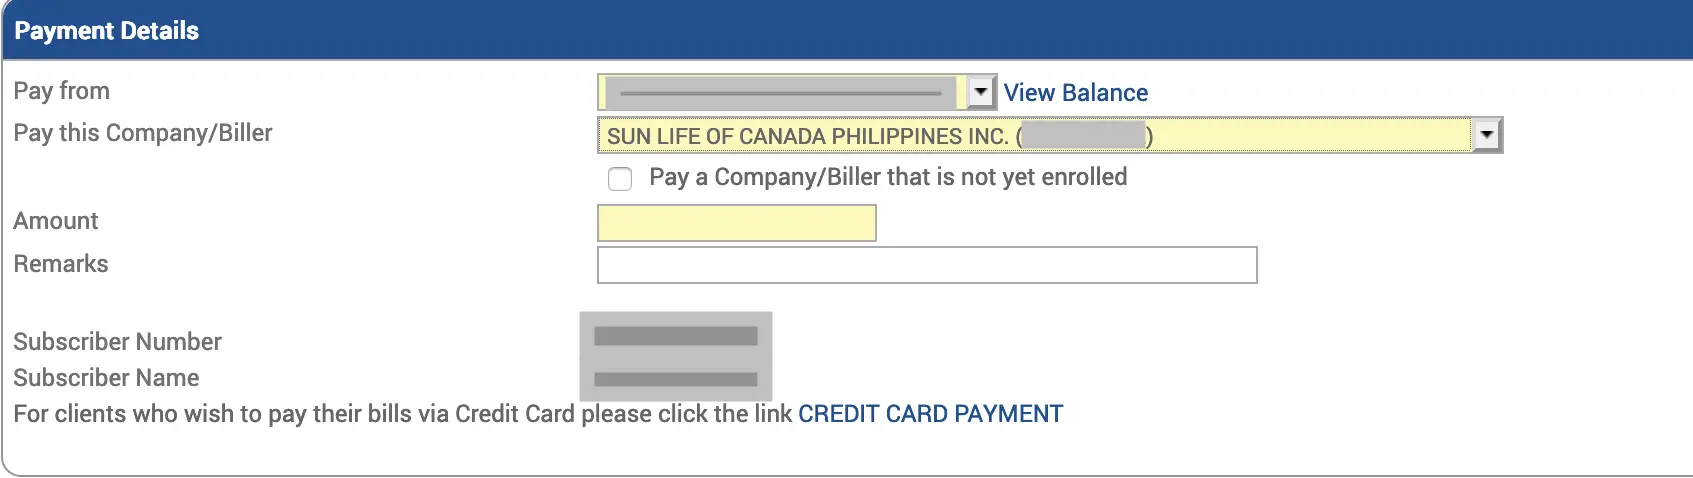 how to pay sun life insurance bdo online